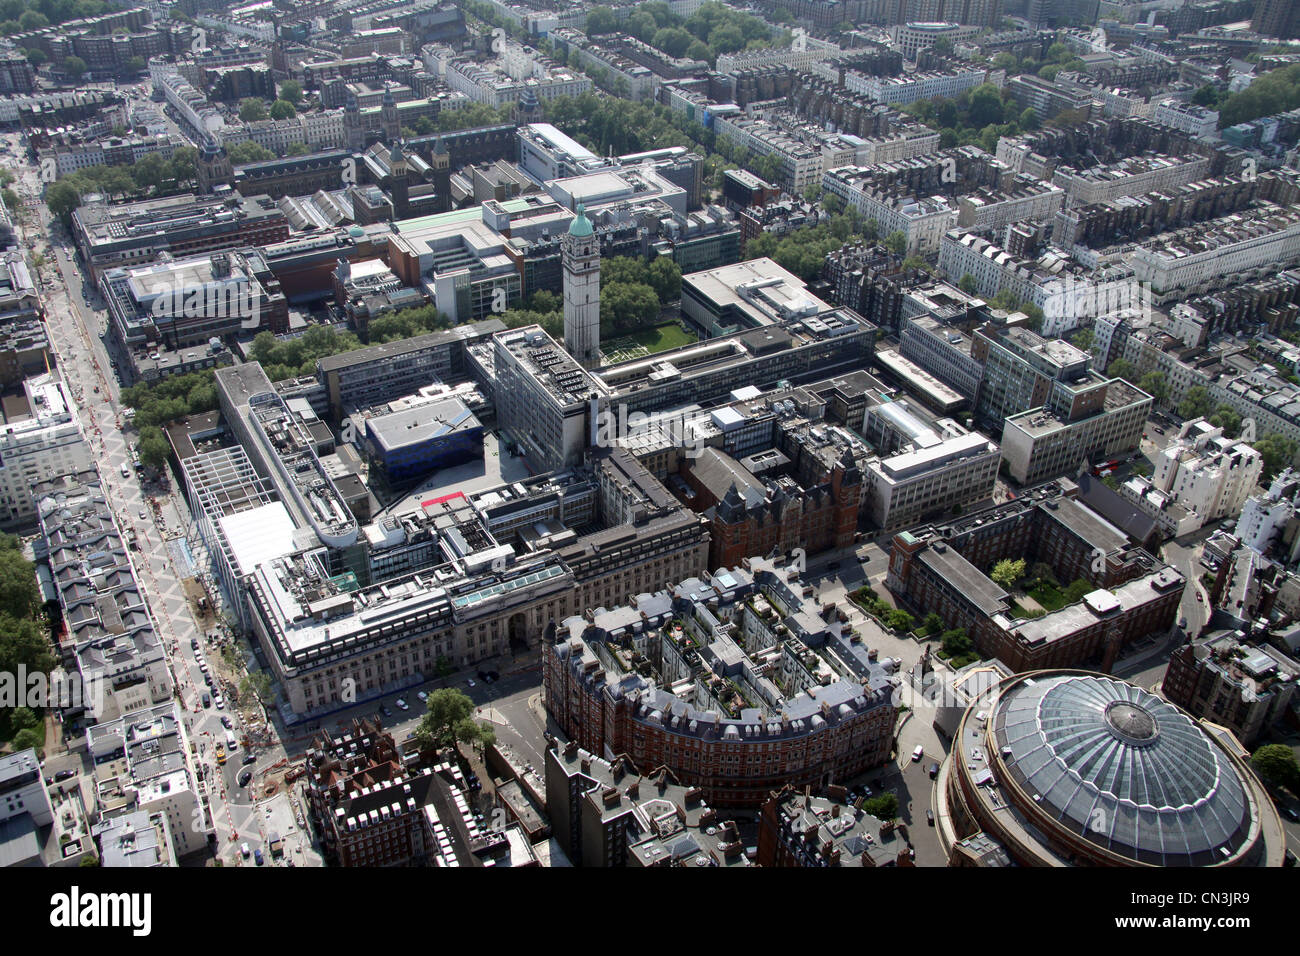 Aerial view of Knightsbridge. Albert Hall, Royal College of Music, Imperial College, Science Museum, London SW7. Stock Photo